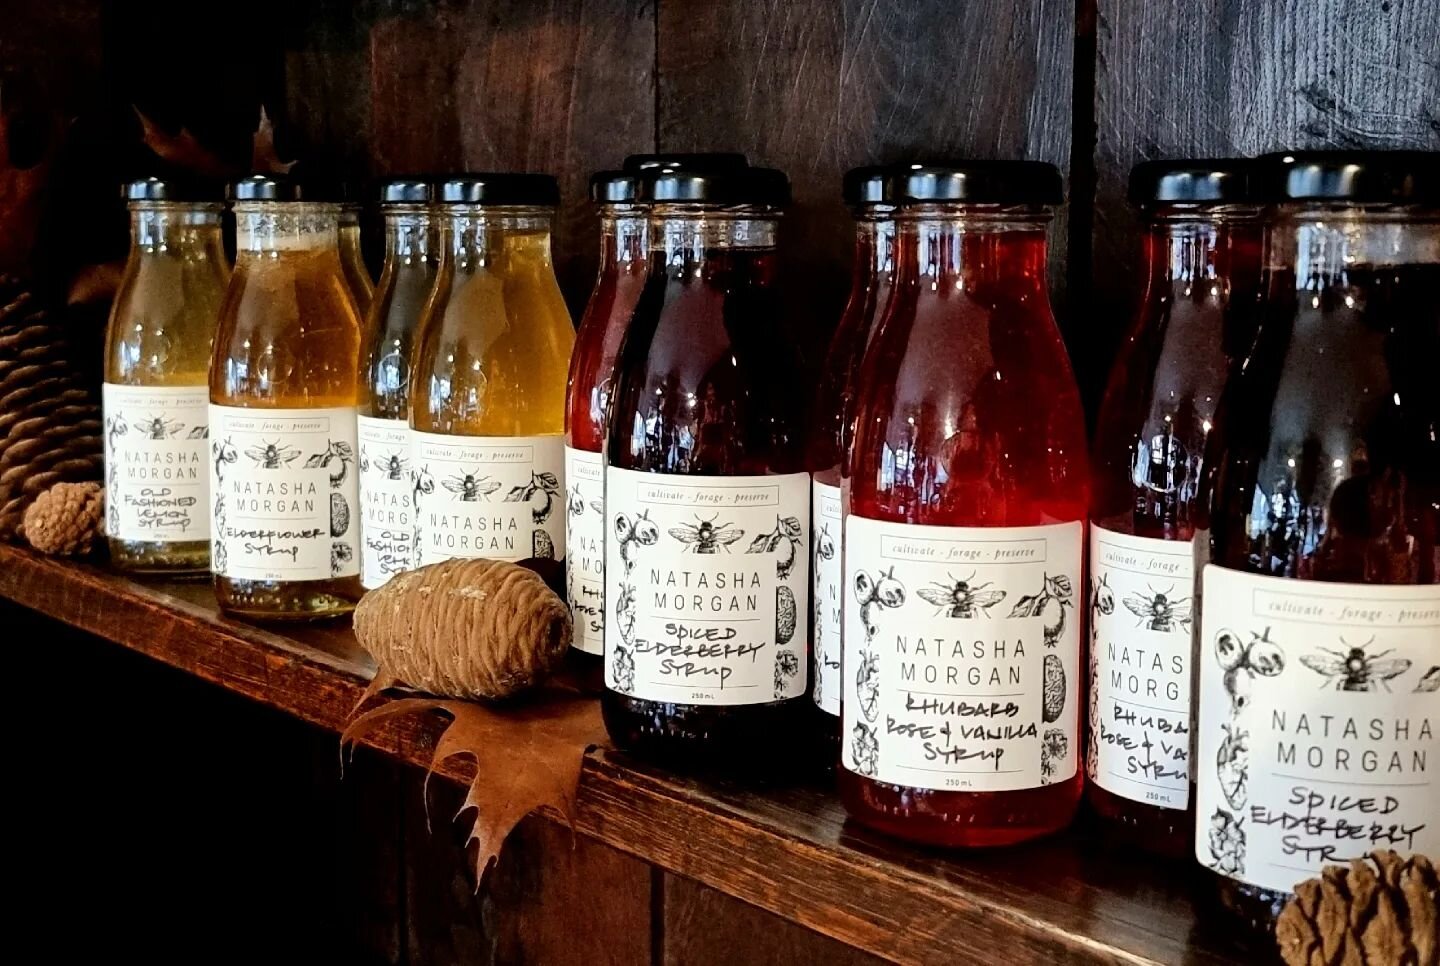 O A K  L A N E &amp; Co. is very proud and pleased to now be stocking the wonderful artisan syrups made by @natasha_morgan_ .
Produced using seasonal locally grown and organic produce in small batches, they are delicious any time of day over porridge